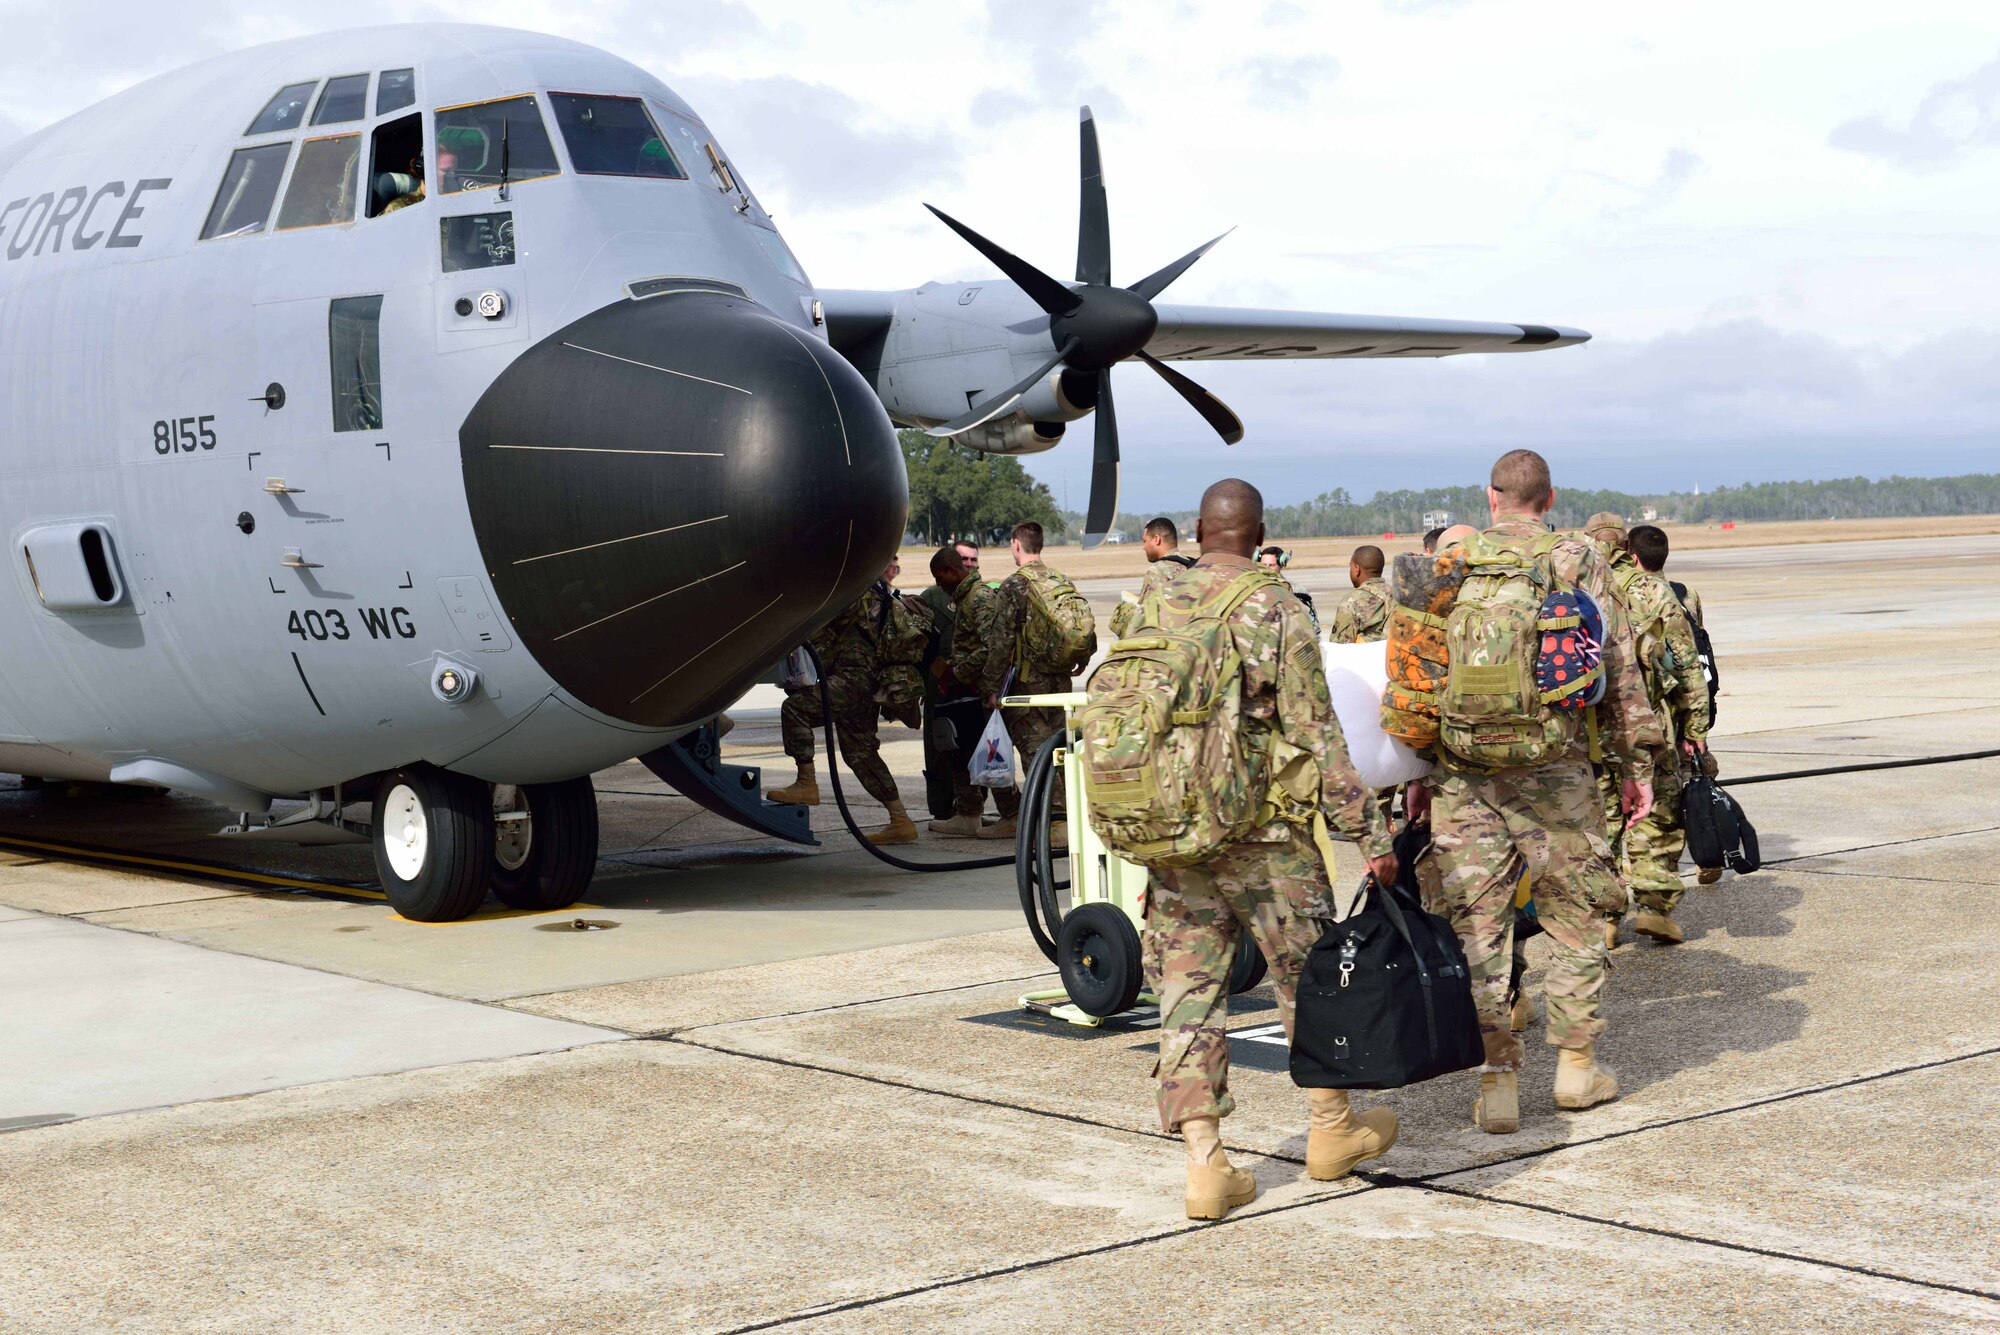 Members of the 403rd Wing prepare to board a C-130J Super Hercules aircraft flown by the 815th Airlift Squadron Jan. 8, 2018, at Keesler Air Force Base, Mississippi, to leave for their deployment to Southwest Asia. The mission of the 815th AS, a tactical airlift squadron assigned to the 403rd Wing here, is to recruit, organize and train to deploy, redeploy and employ air and ground forces to any area of the world and provide them with logistical support. (U.S. Air Force photo by Tech. Sgt. Ryan Labadens)